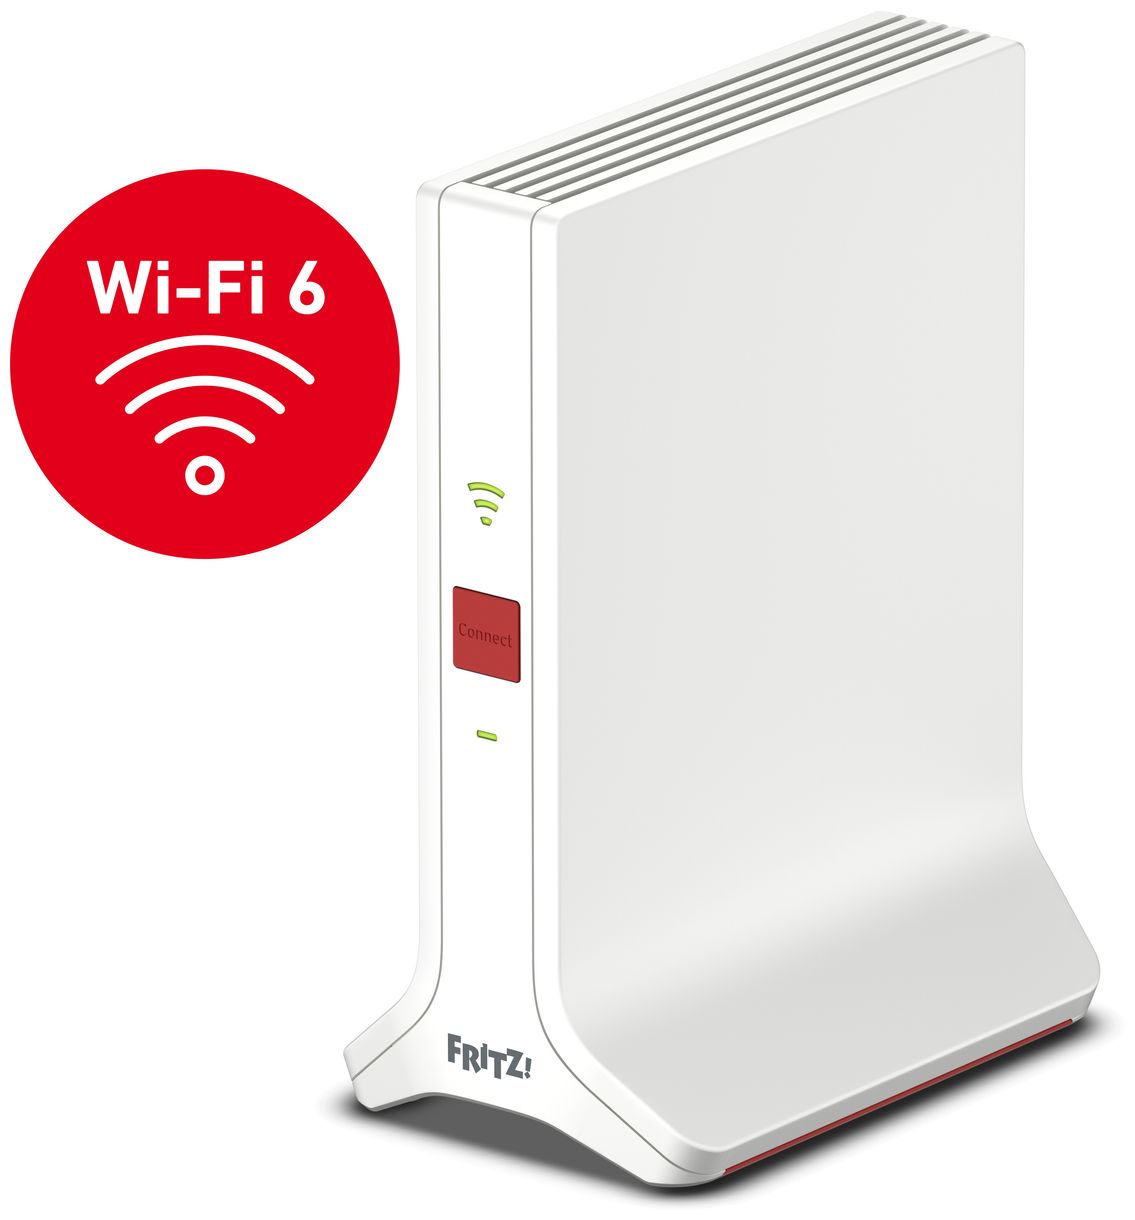 FRITZ!Repeater 3000 AX Wi-Fi 6 (802.11ax) Router Tri-Band (2,4 GHz / 5 GHz / 5 GHz) 600 Mbit/s 